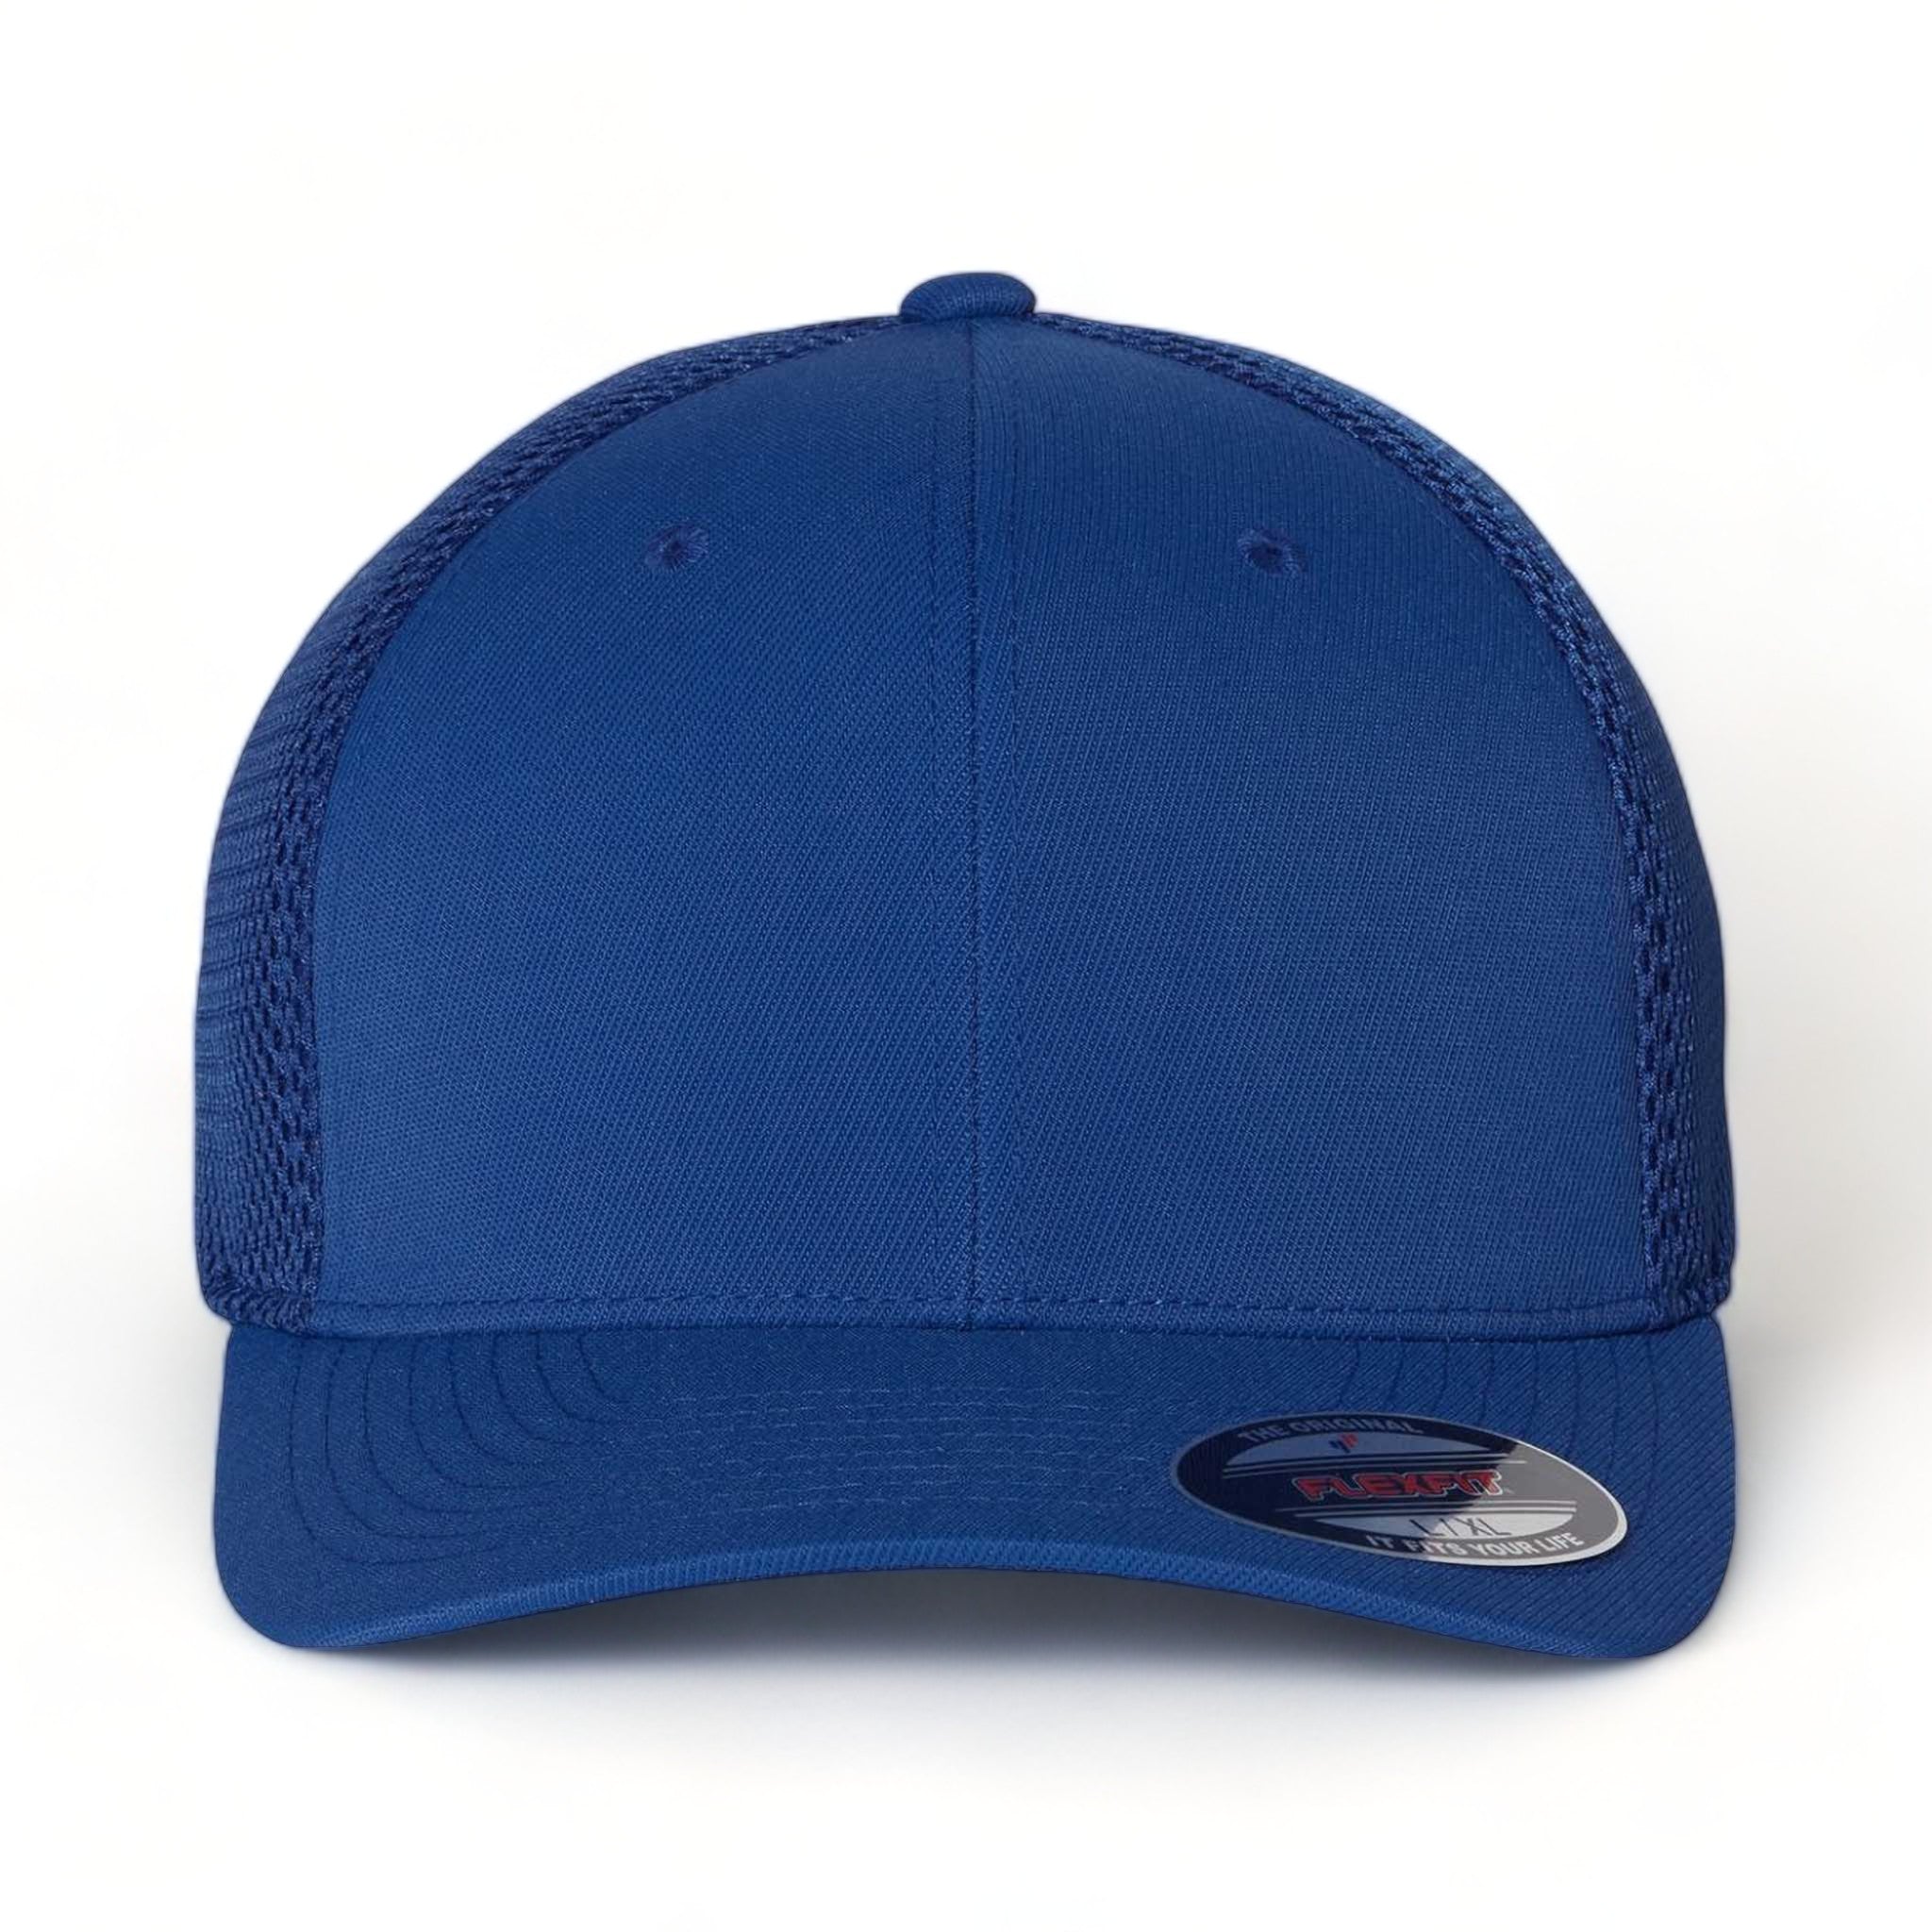 Front view of Flexfit 6533 custom hat in royal blue